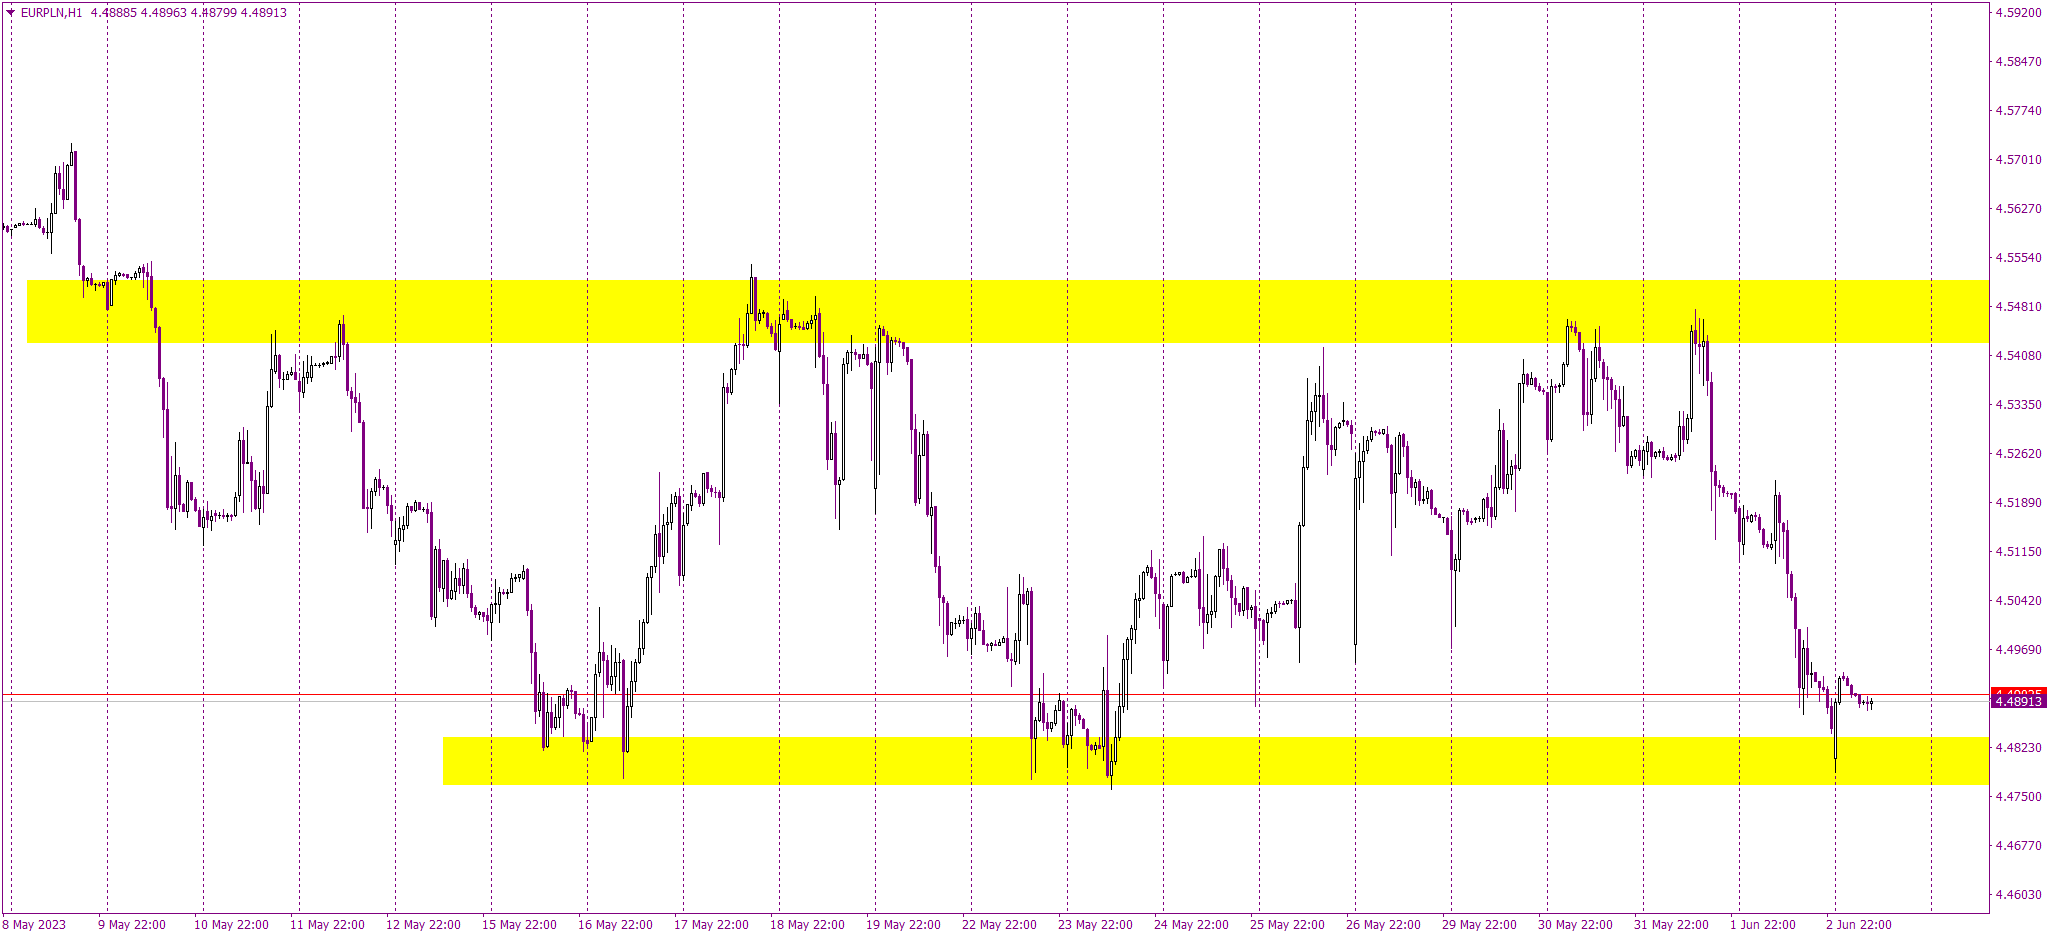 EURPLN: A Technical Pattern Emerges with Breakout Potential